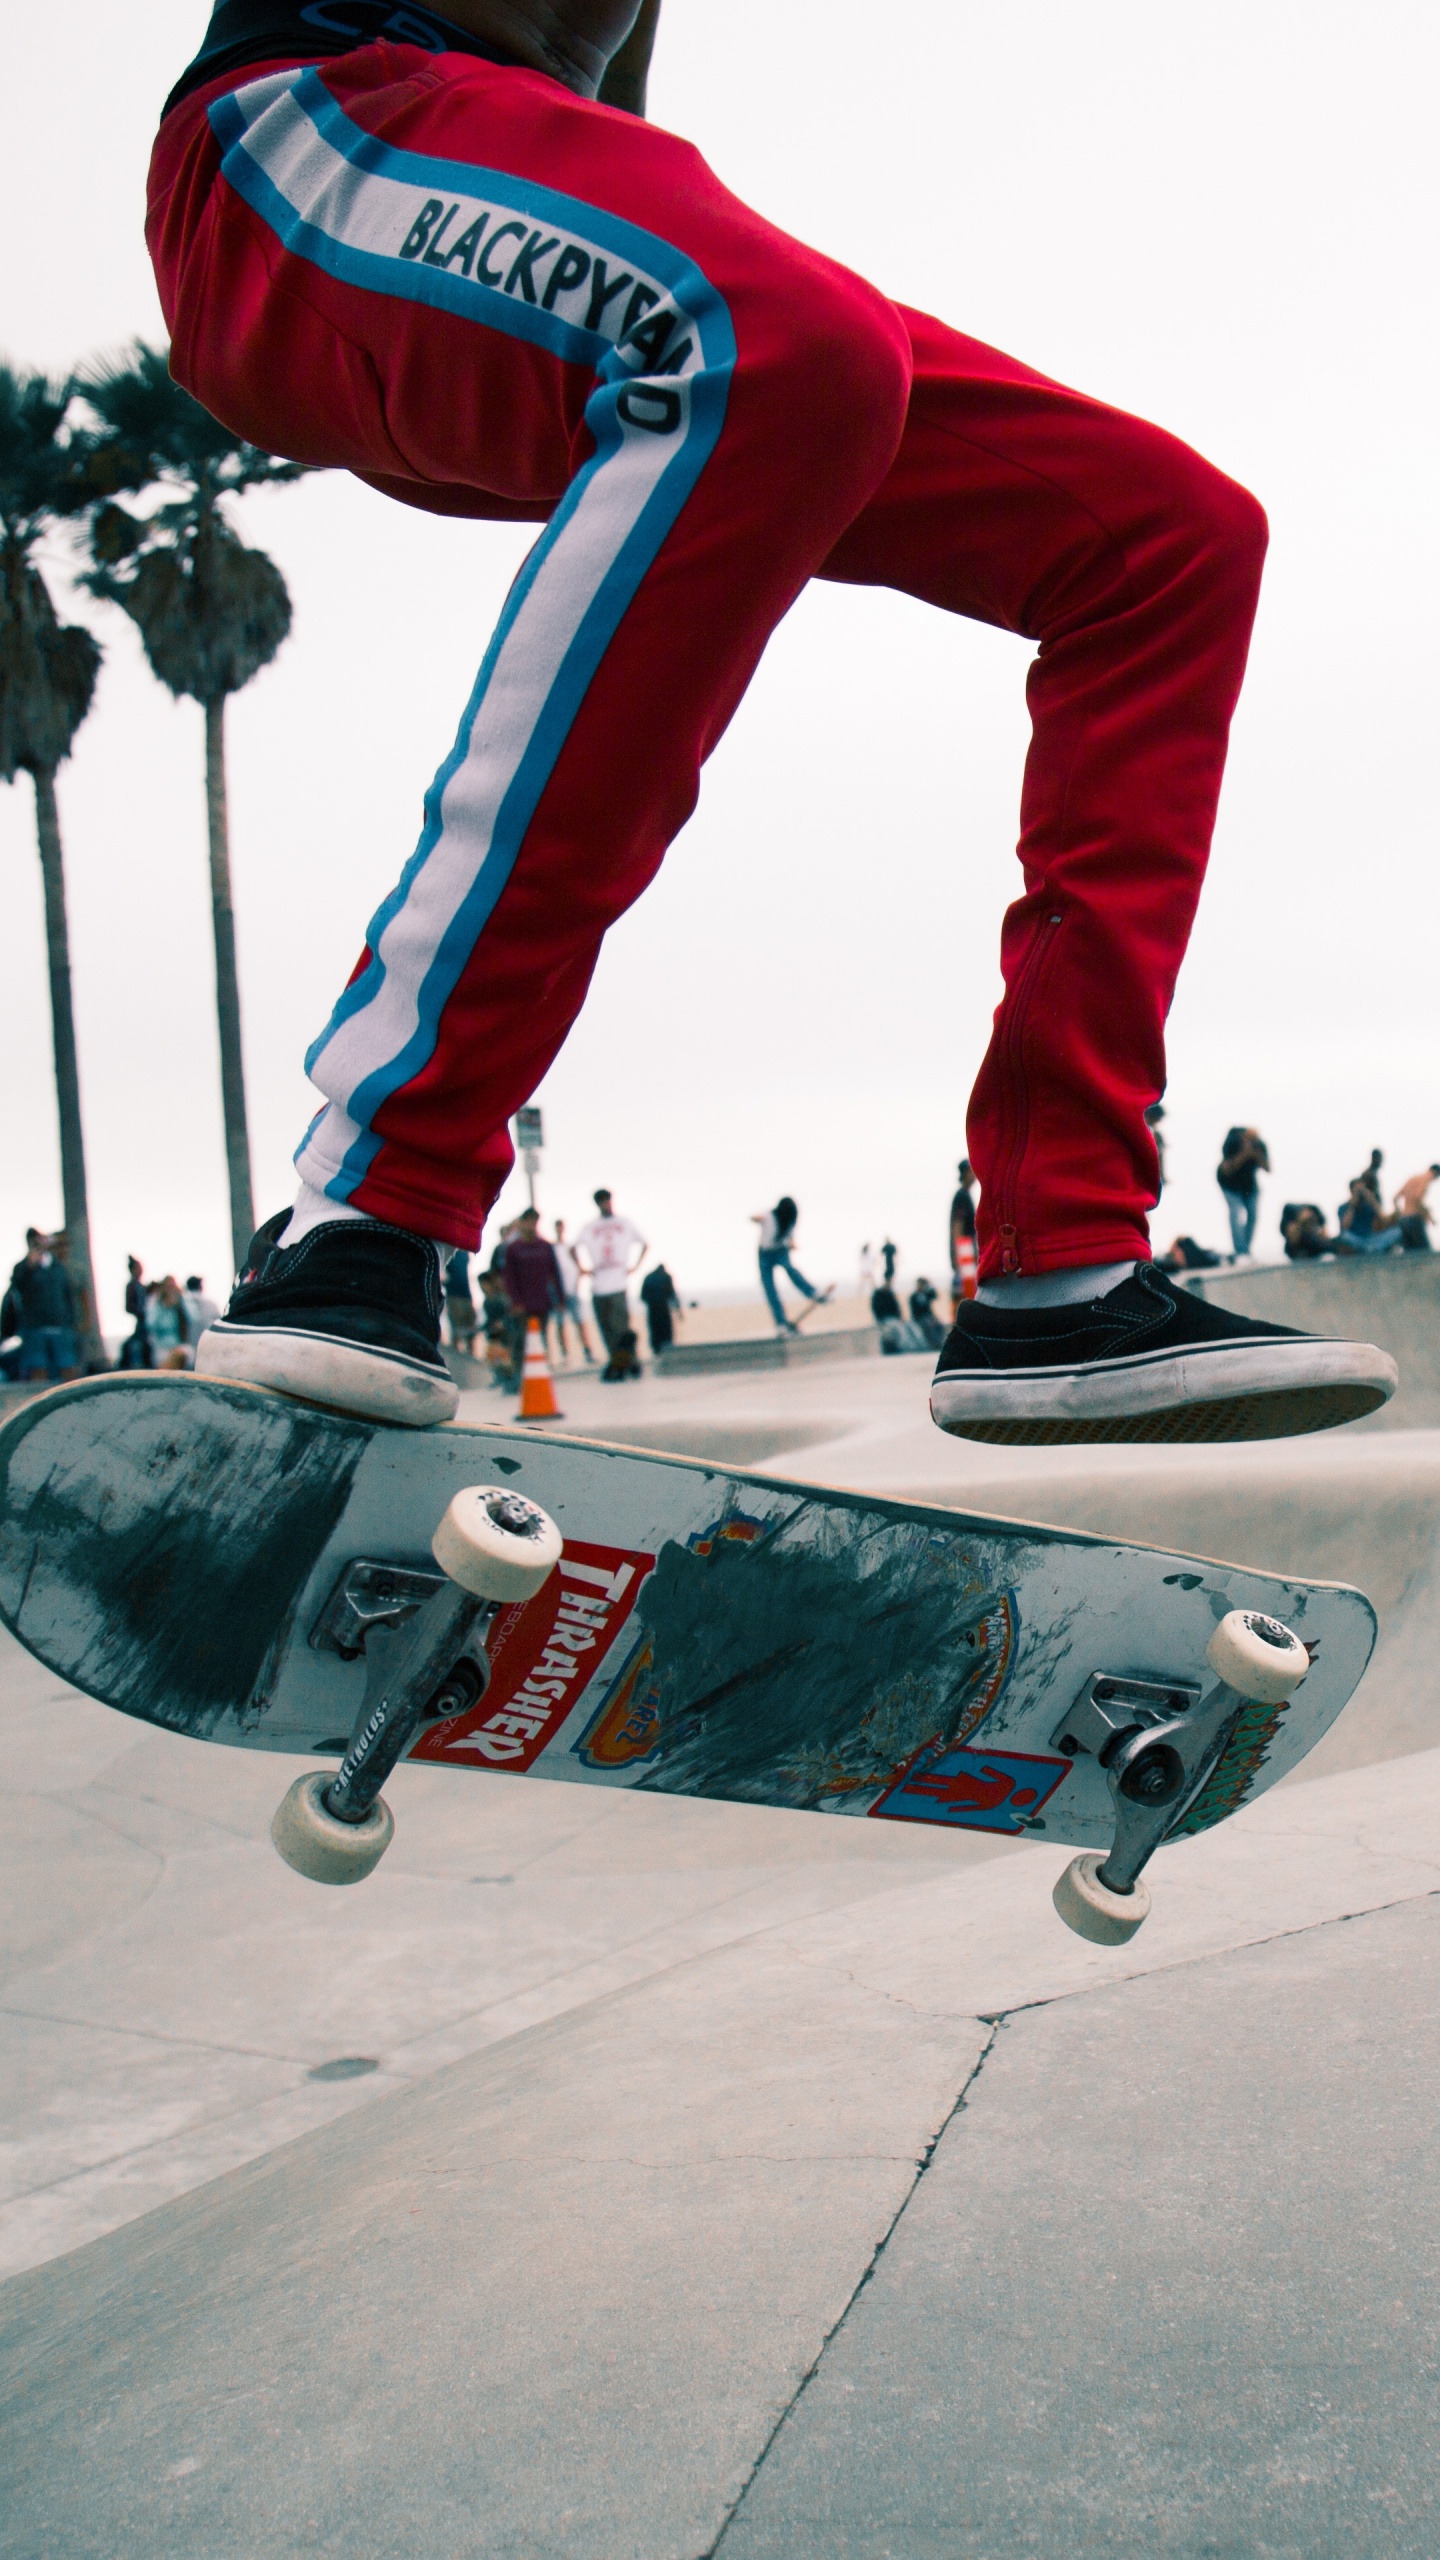 Man in Red Pants and Black and White Sneakers Riding Skateboard. Wallpaper in 1440x2560 Resolution